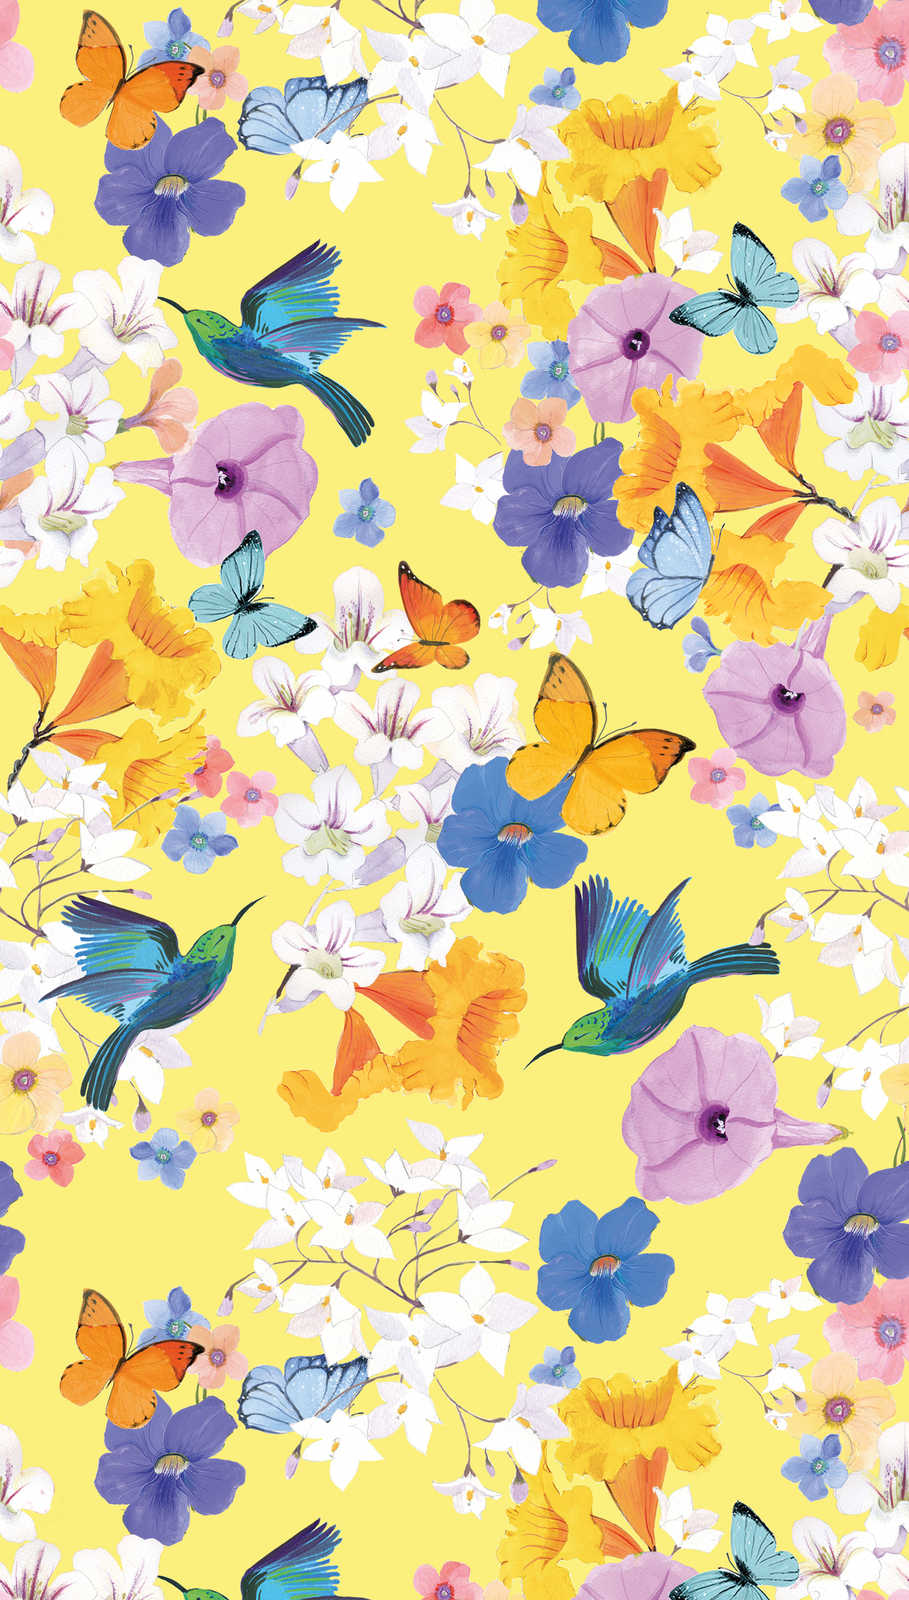             Floral wallpaper with butterflies and birds - colourful, yellow, blue
        